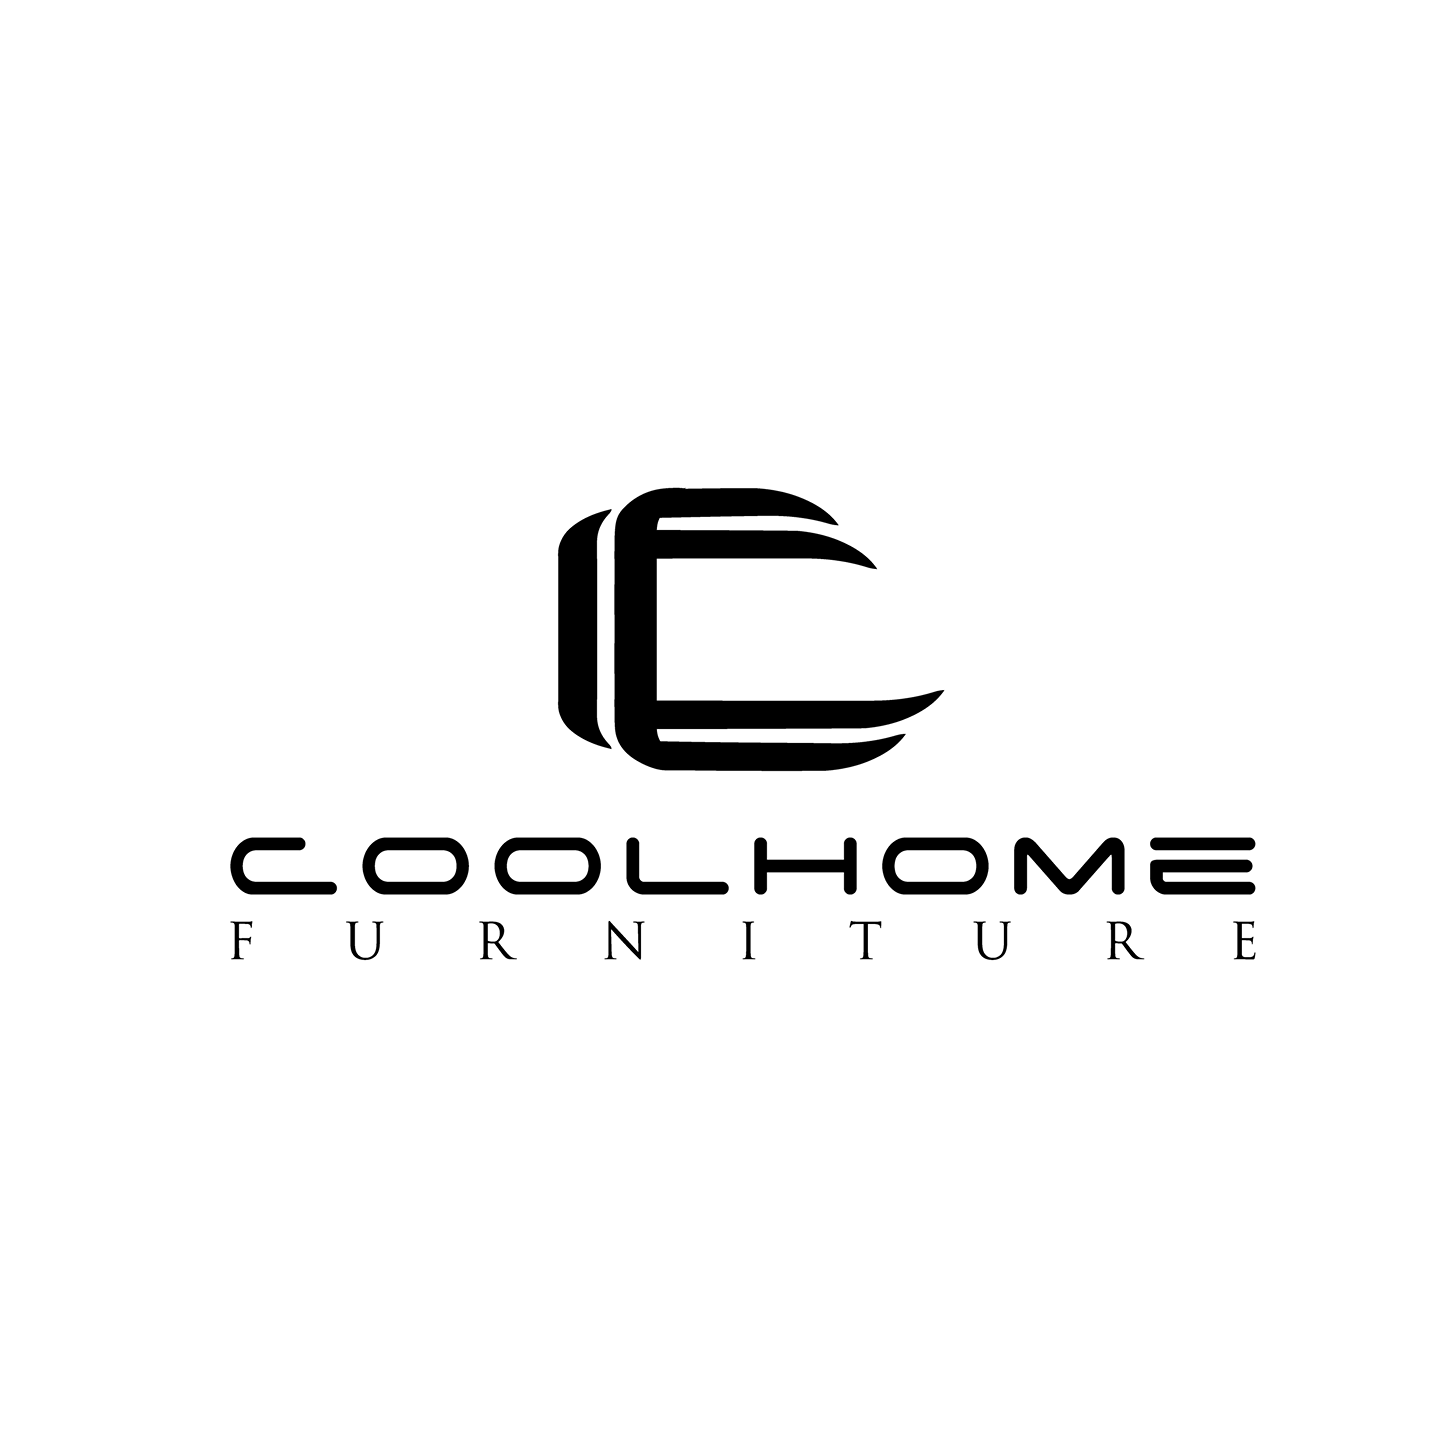 COOLHOME